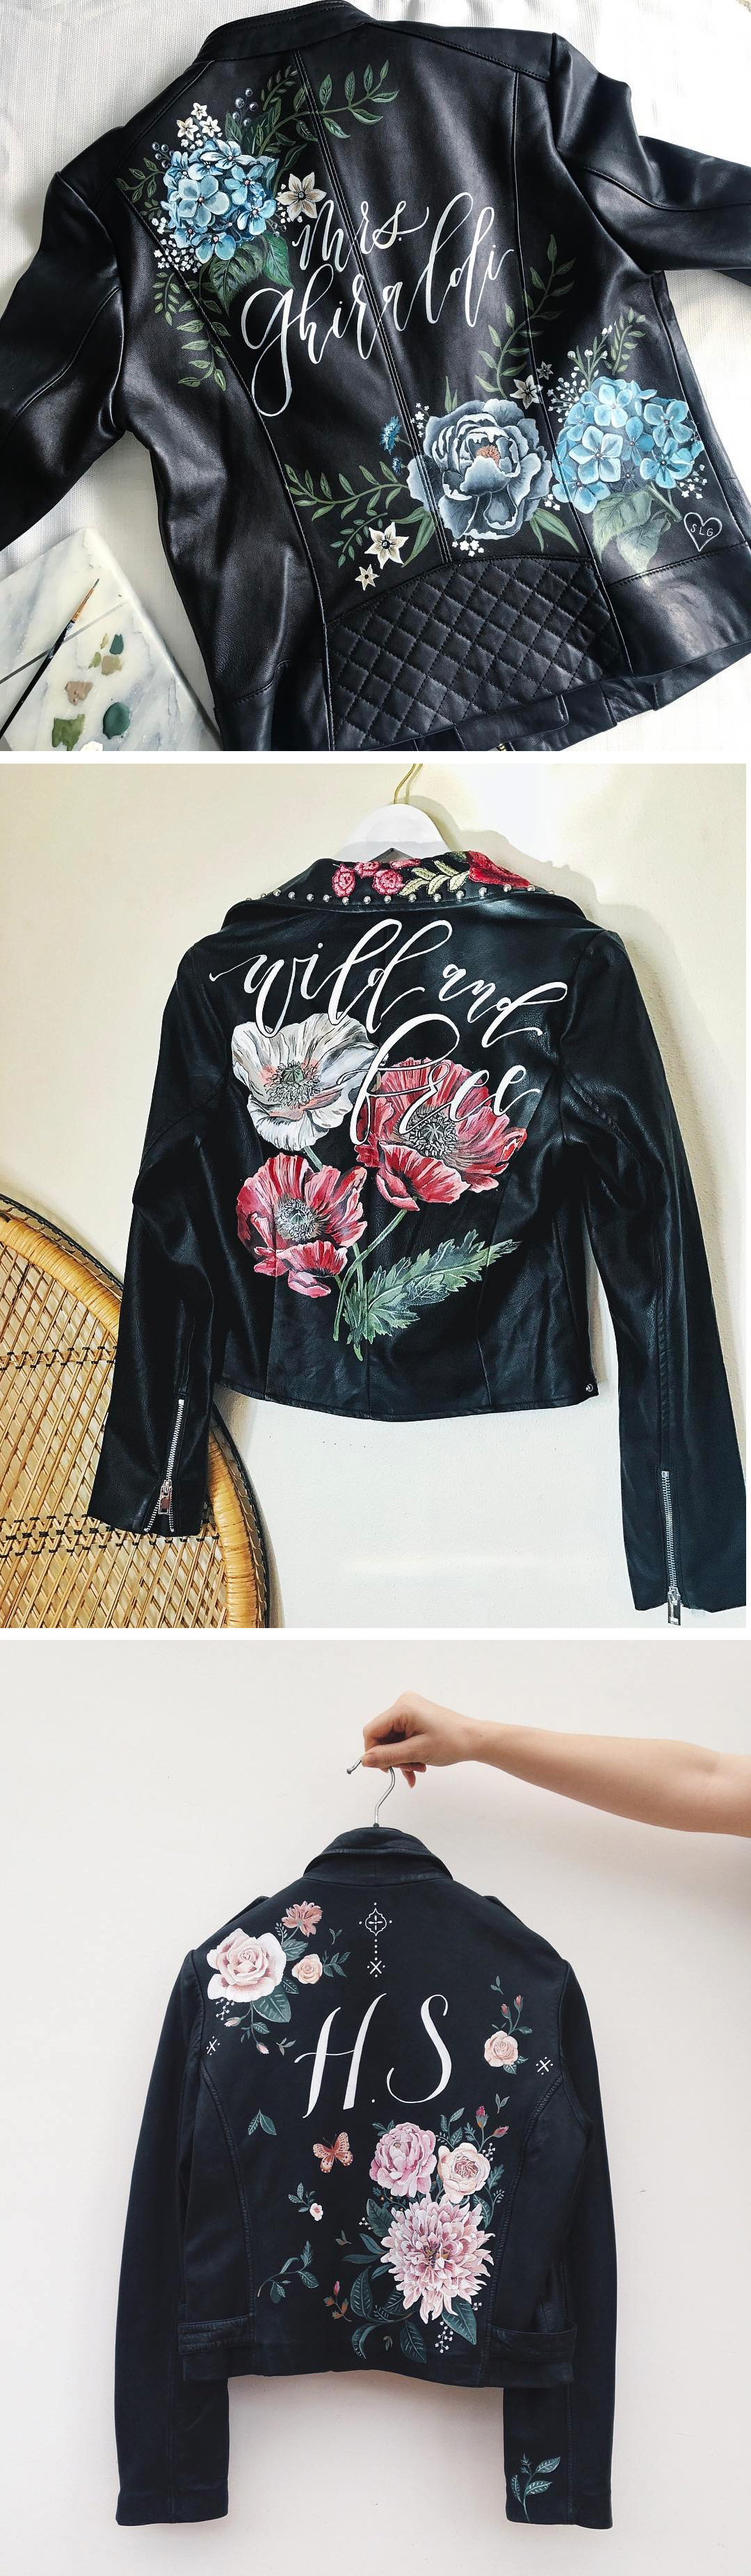 best paint for leather jacket